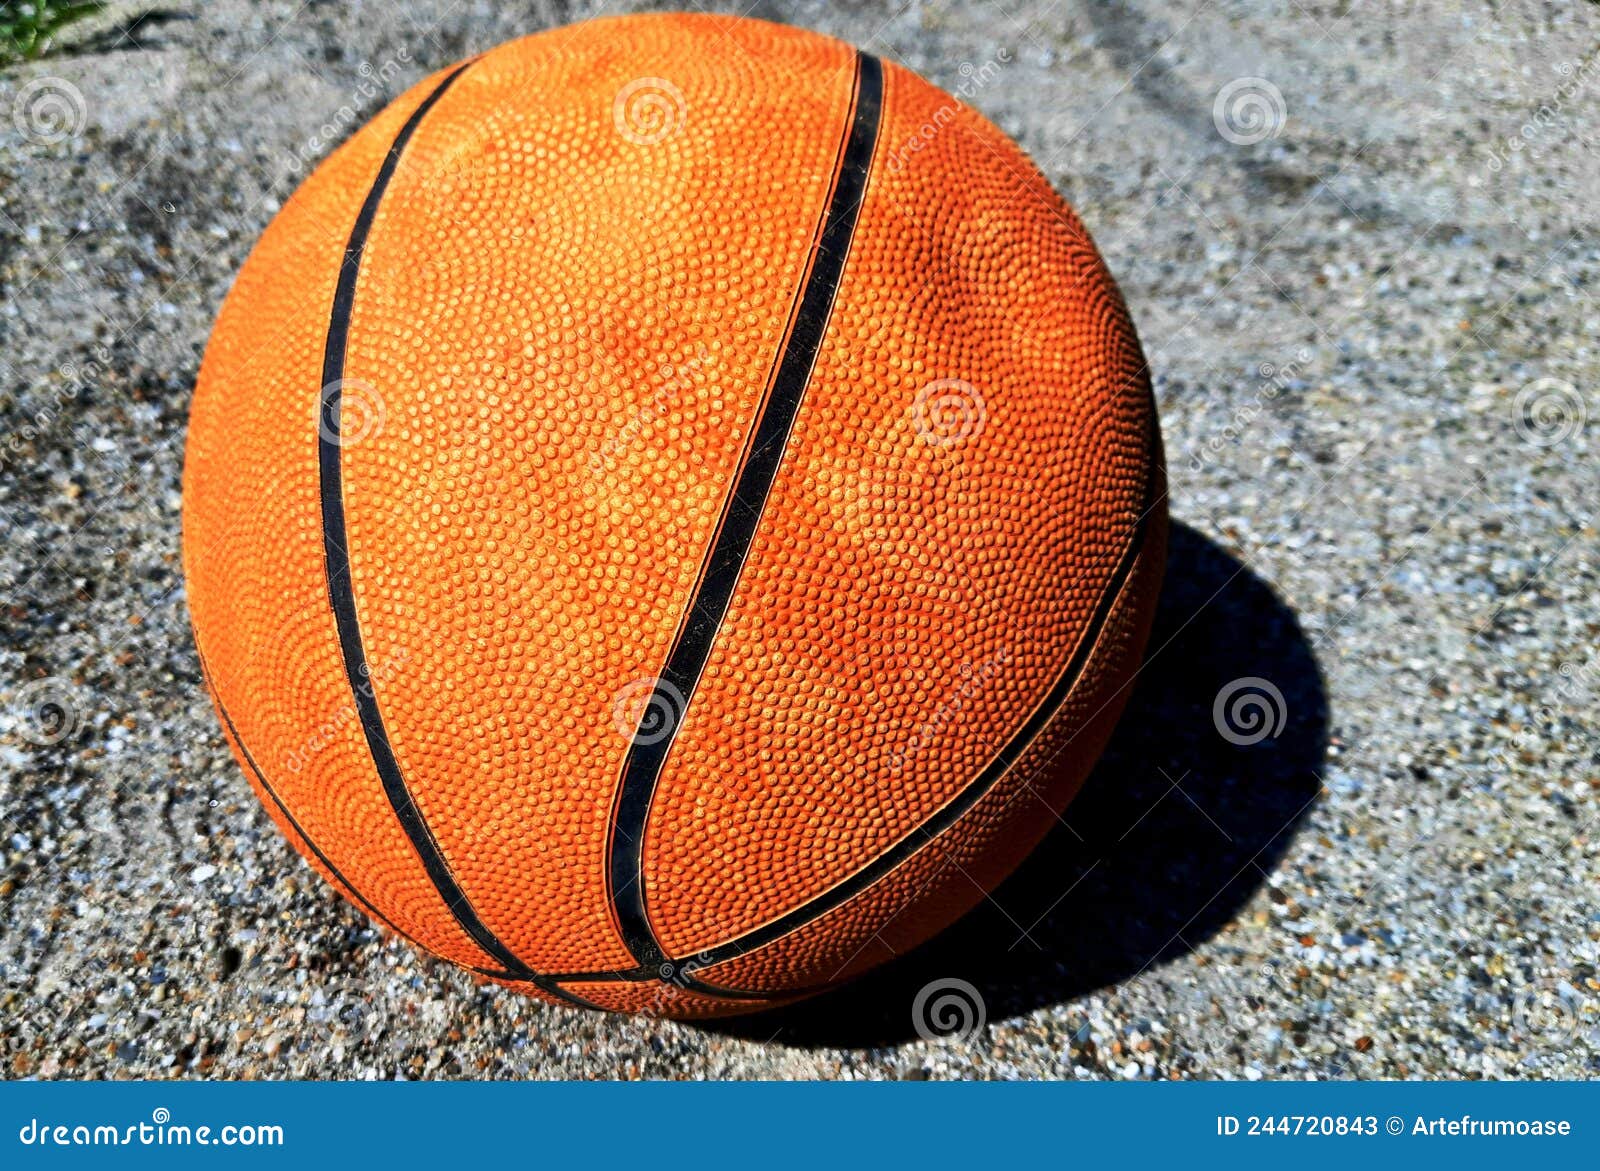 basketball on the sand, children's games outside hollidays, games outdoors